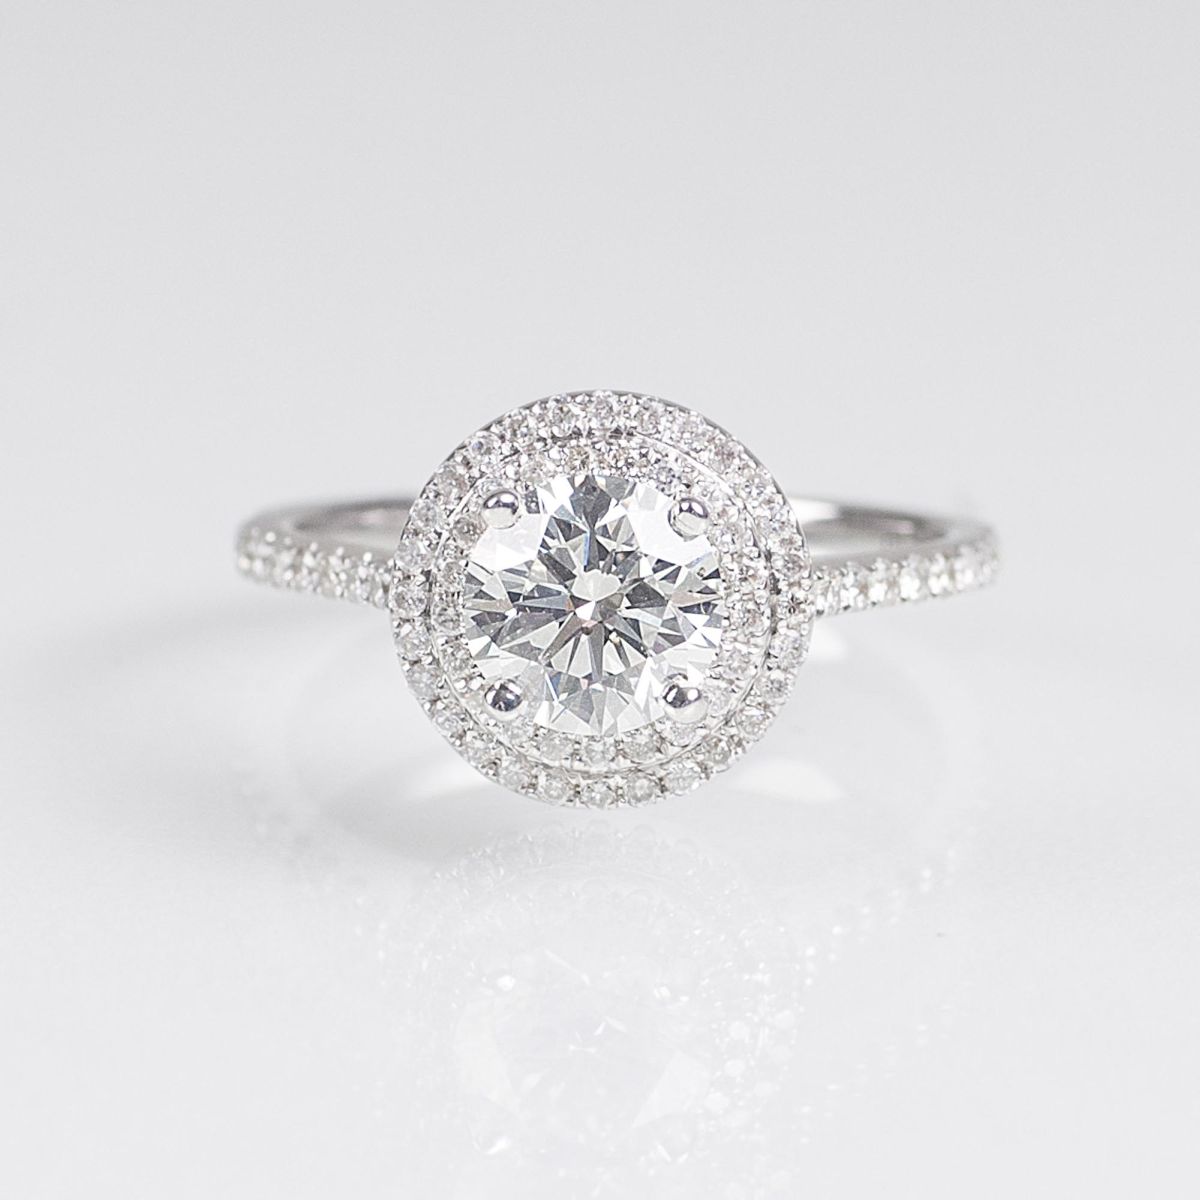 A Classical Solitaire Diamond Ring